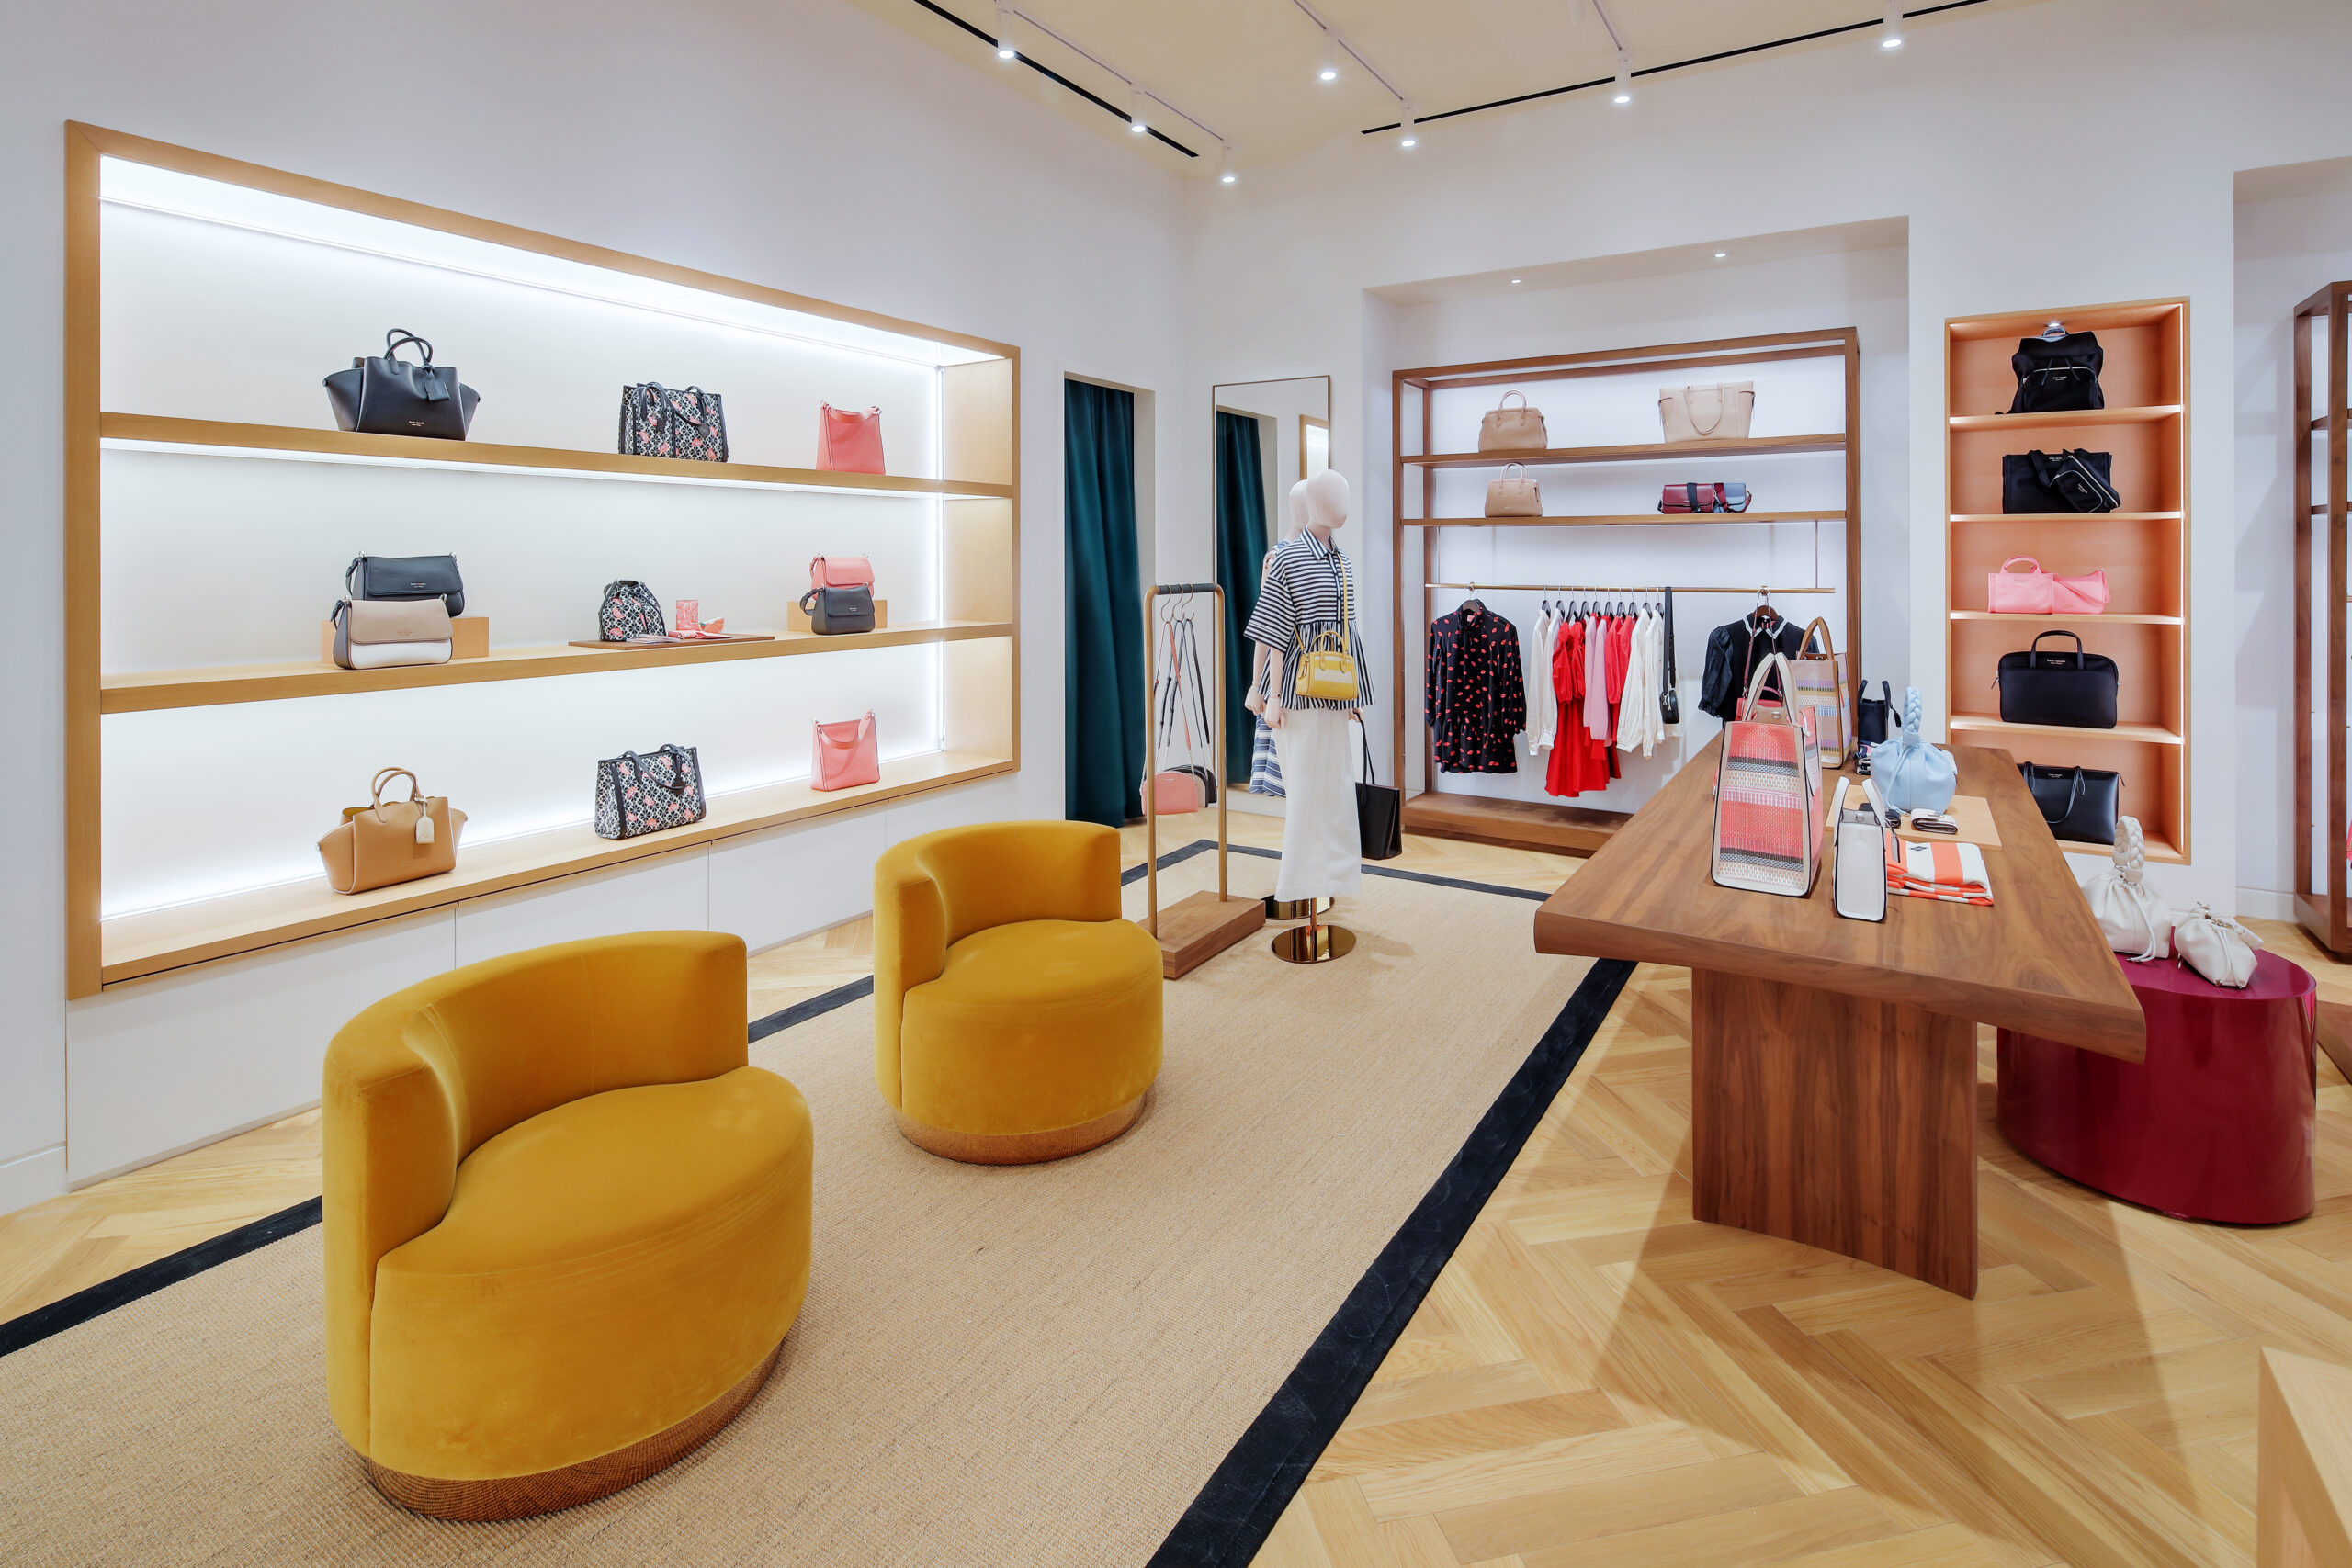 Kate Spade New York Opens a Spectacular New Store in Pavilion, Bukit ...